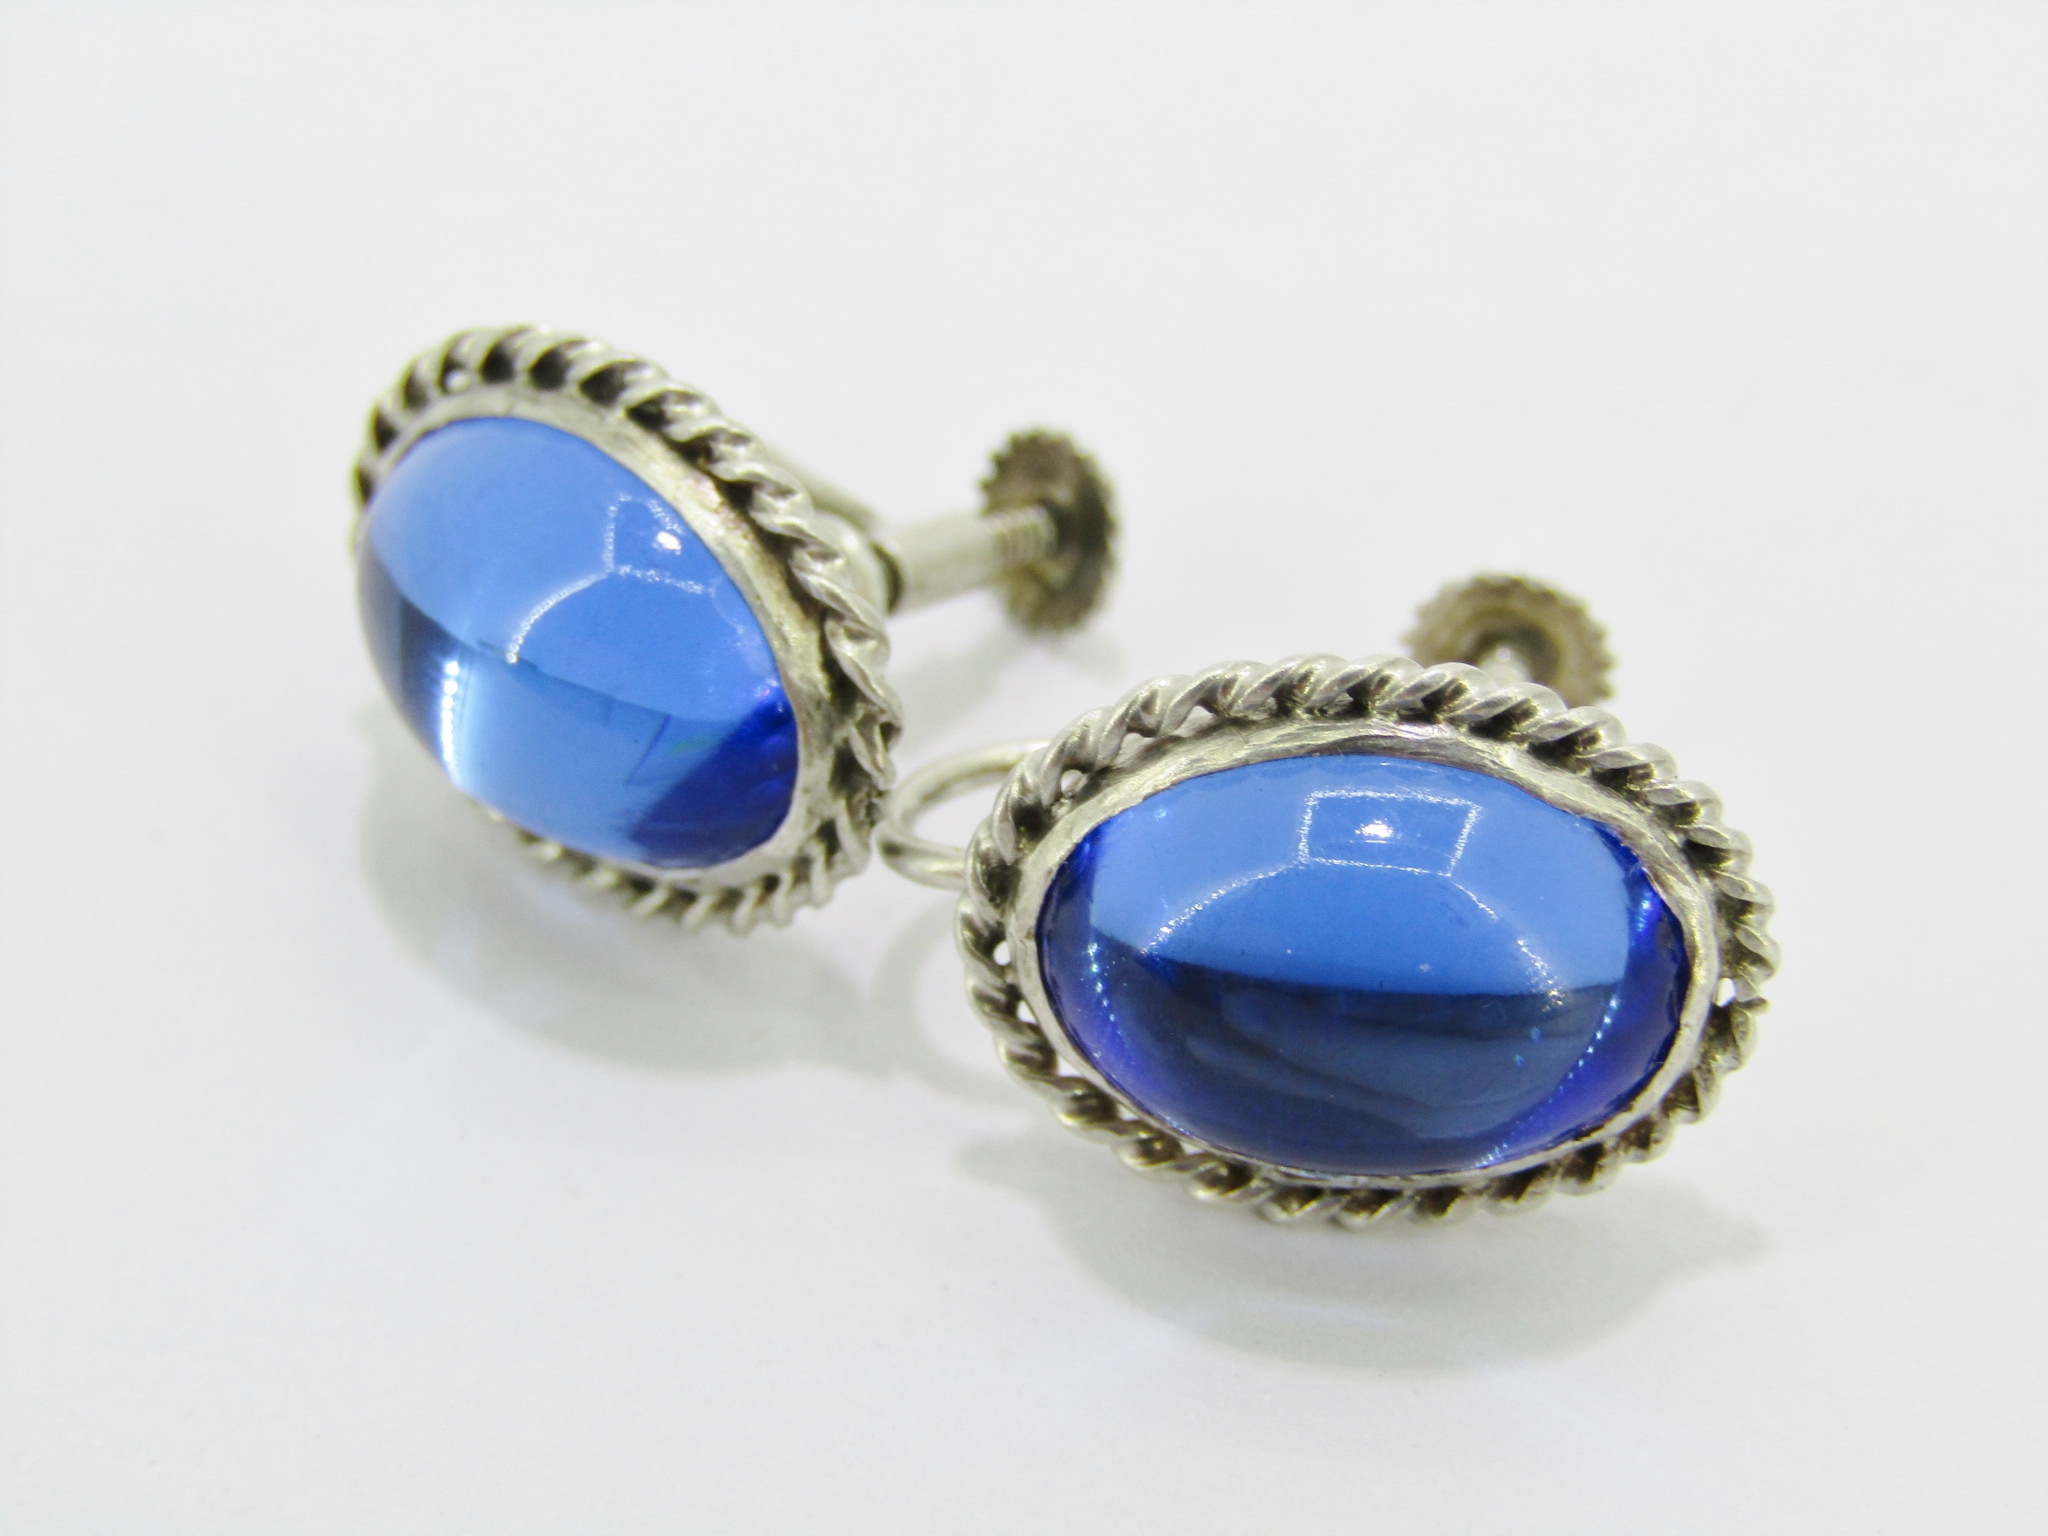 A Gorgeous Vintage Pair of Blue Paste Stone Screw Back Earrings in Sterling Silver.